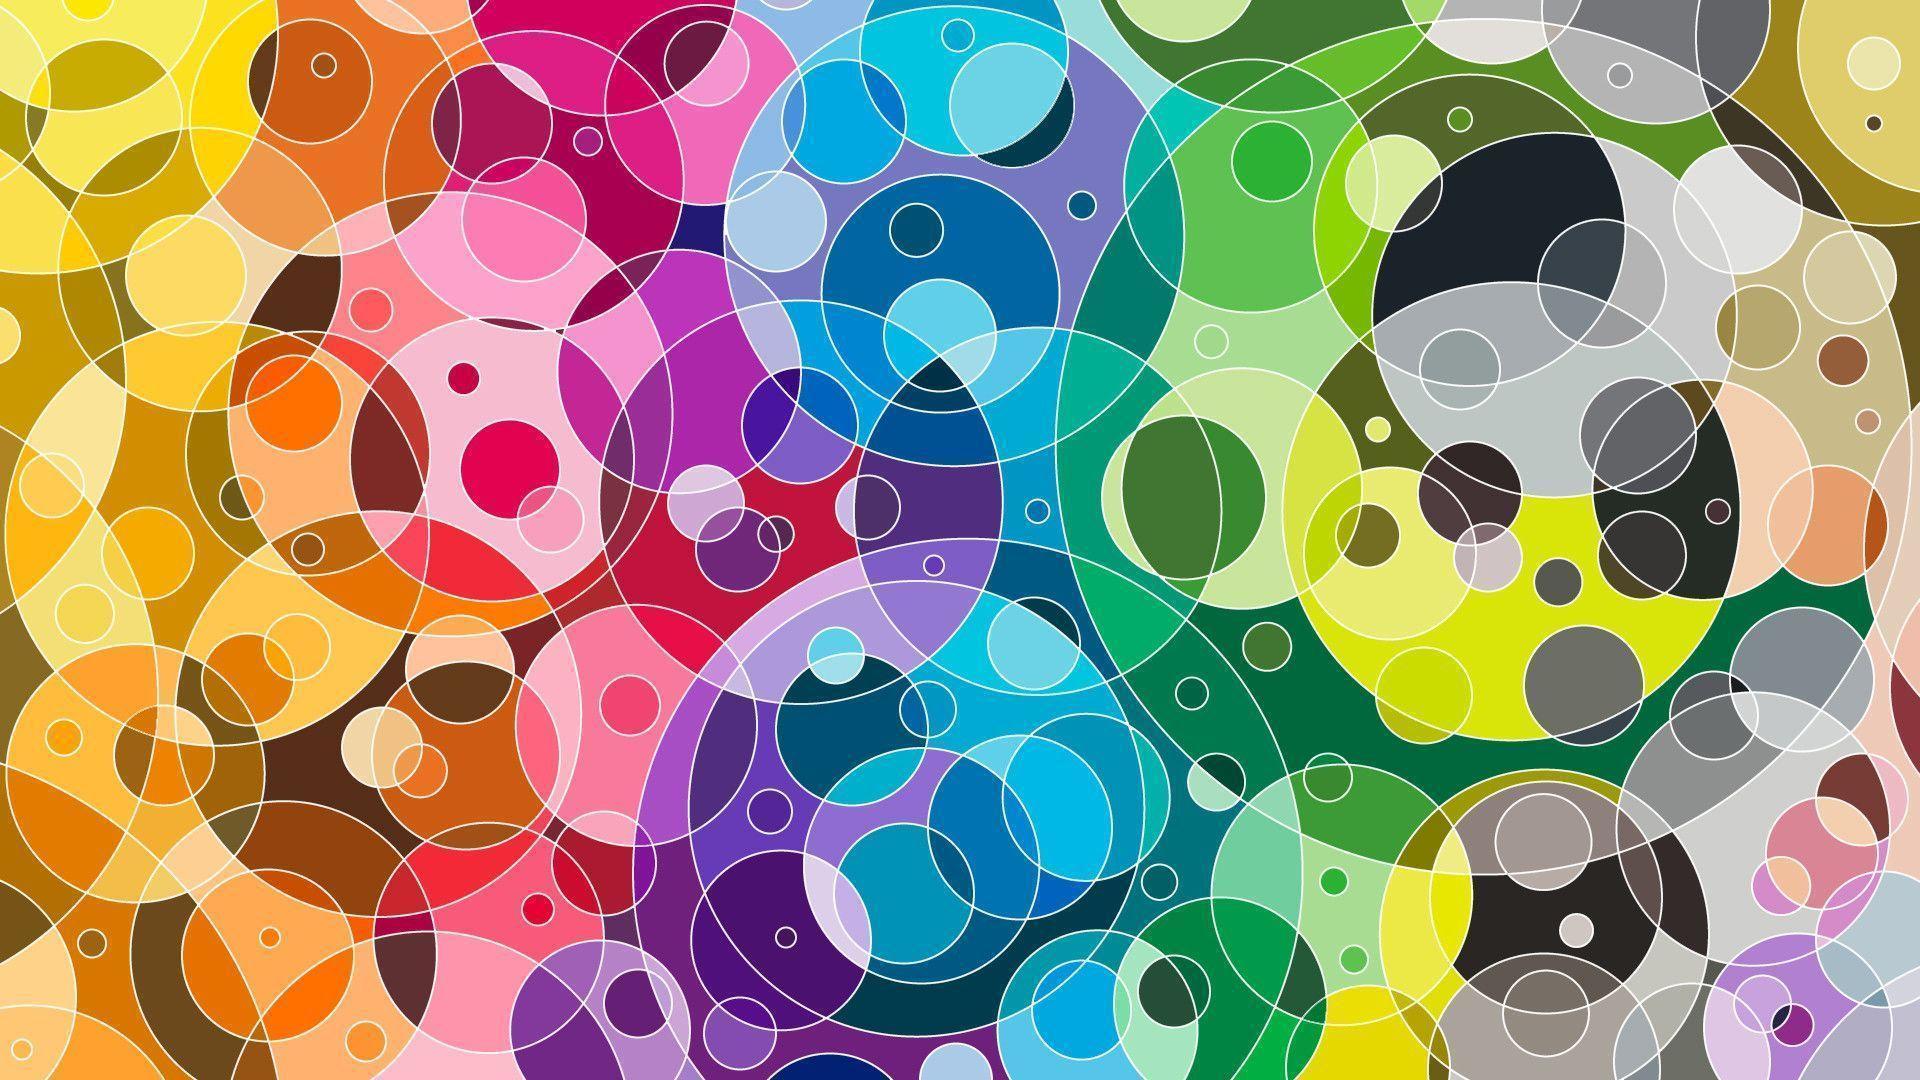 Super cool colorful HD exclusive background! Circles! 1920 x 1080